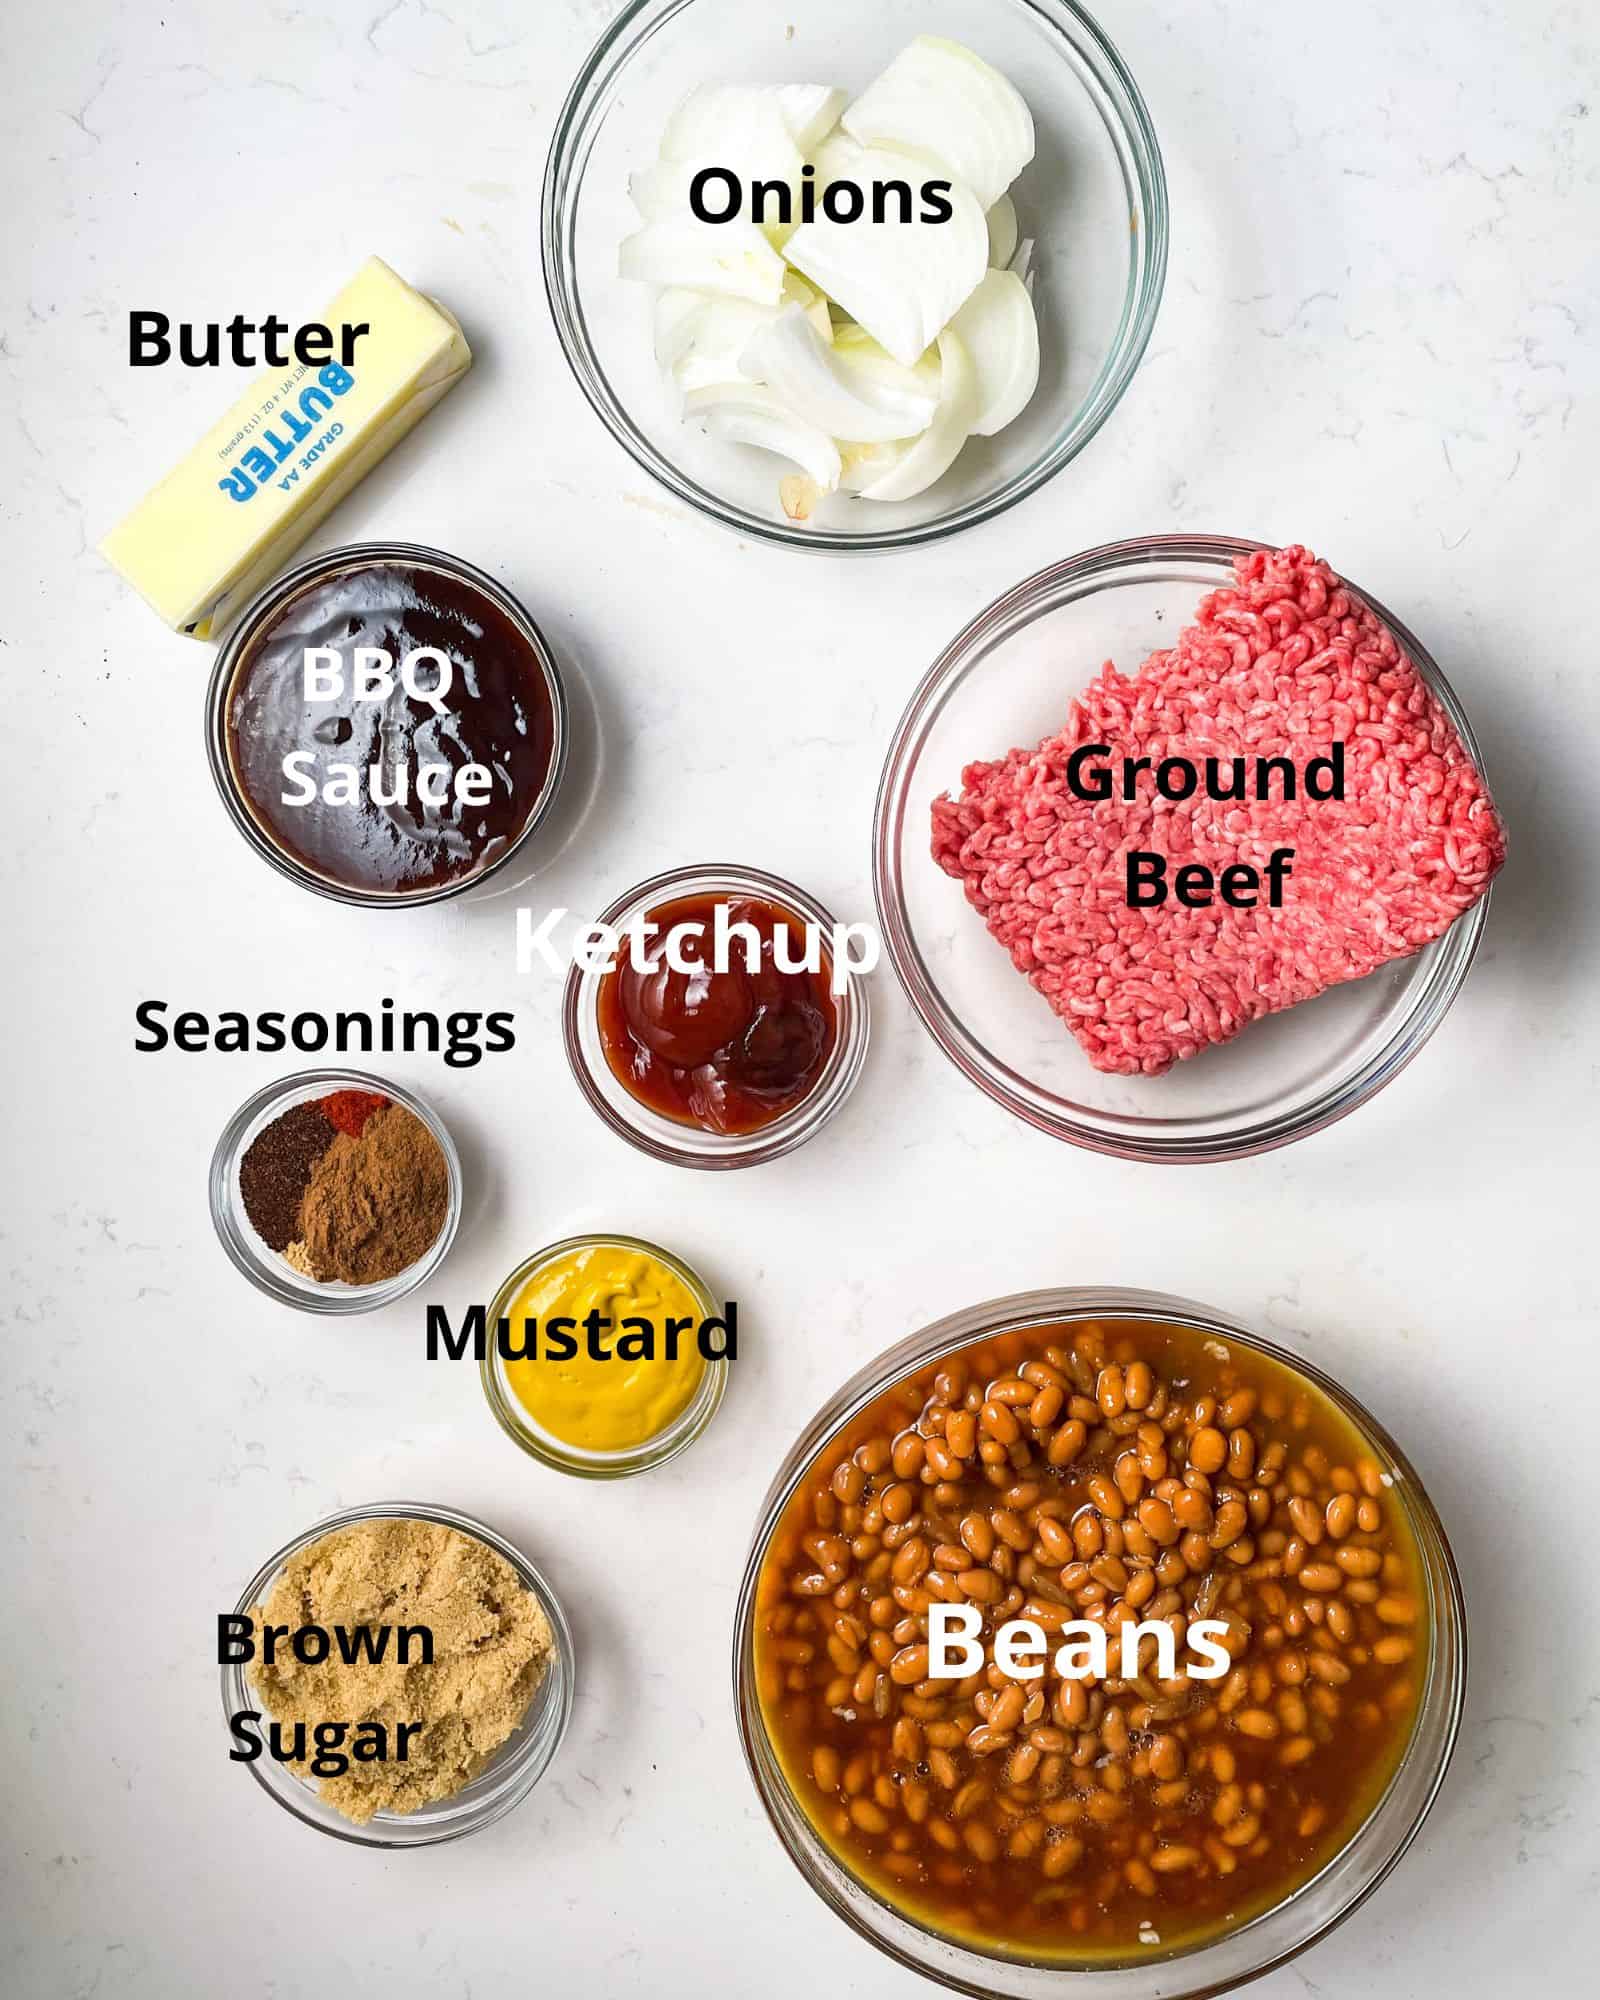 Baked beans ingredients